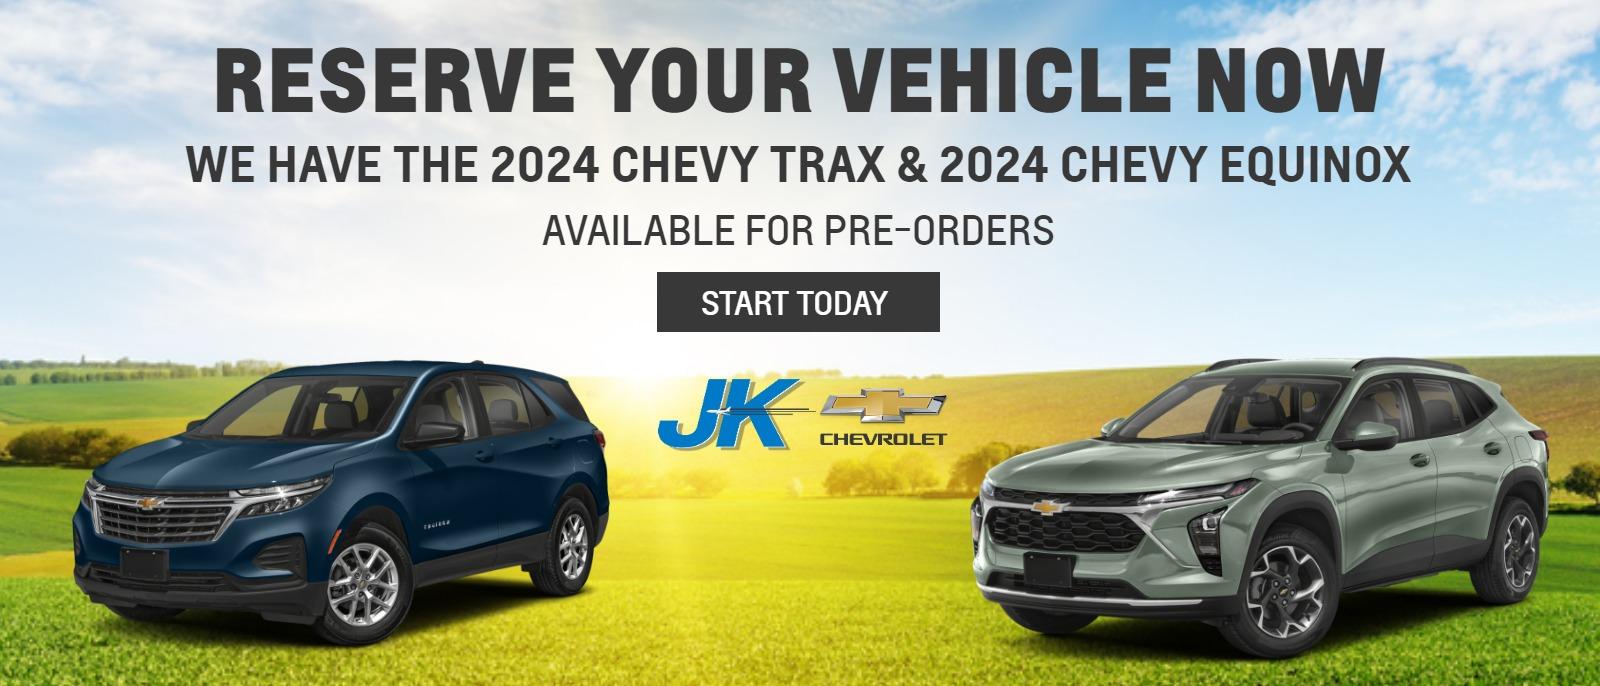 RESERVE YOUR VEHICLE NOW
We have the 2024 Chevy Trax & 2024 Chevy Equinox
available for pre-orders